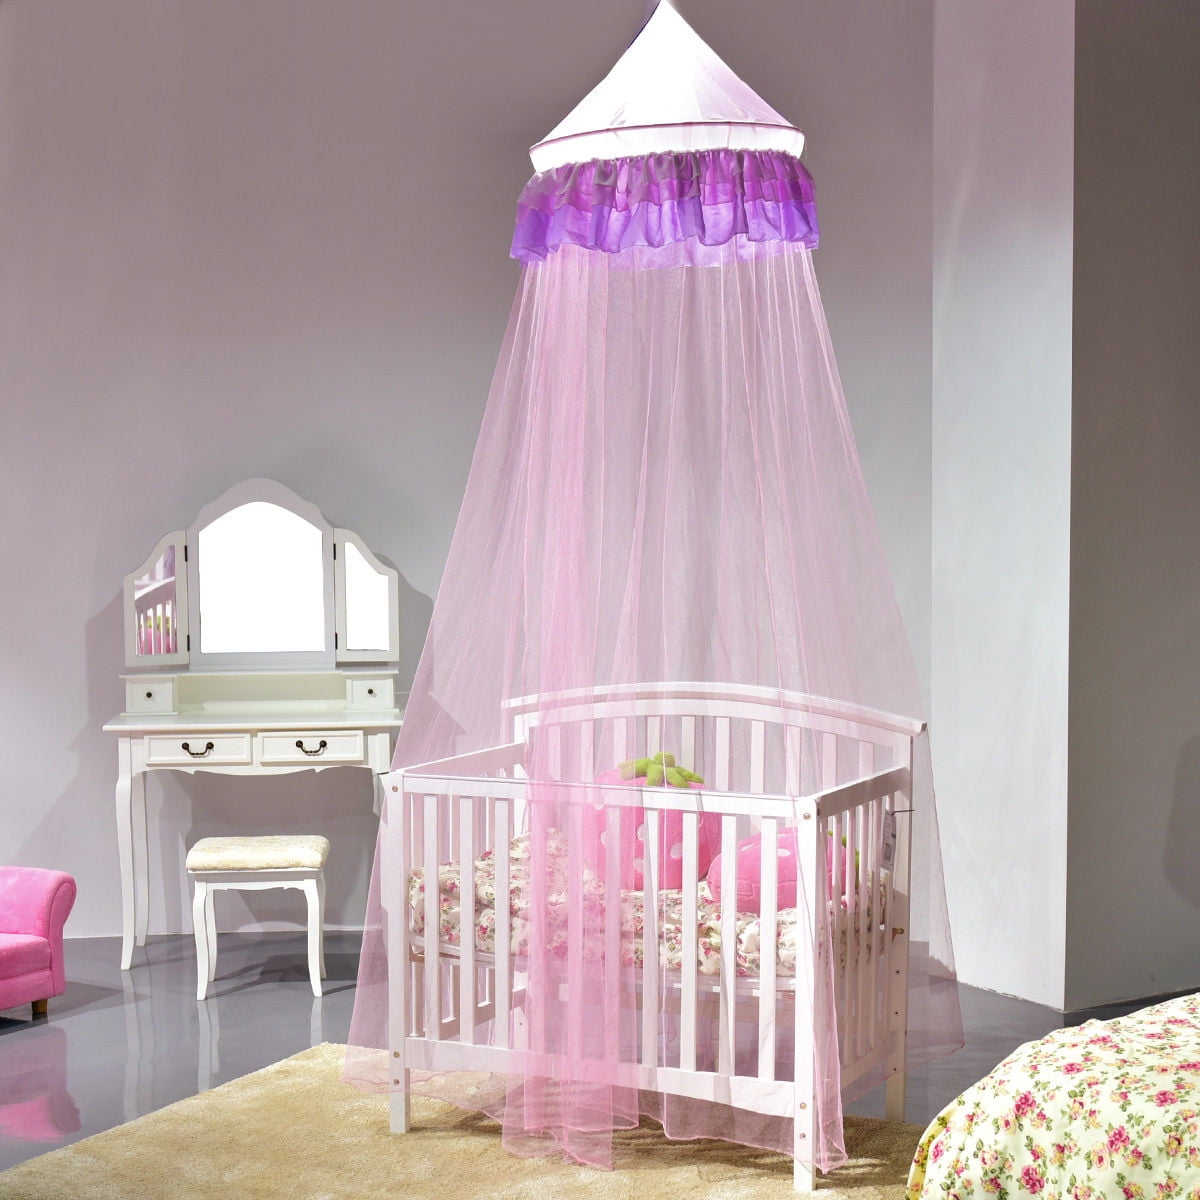 Lace Bed Mosquito Netting Mesh Canopy Princess Round Dome Bedding Net MultiColor 